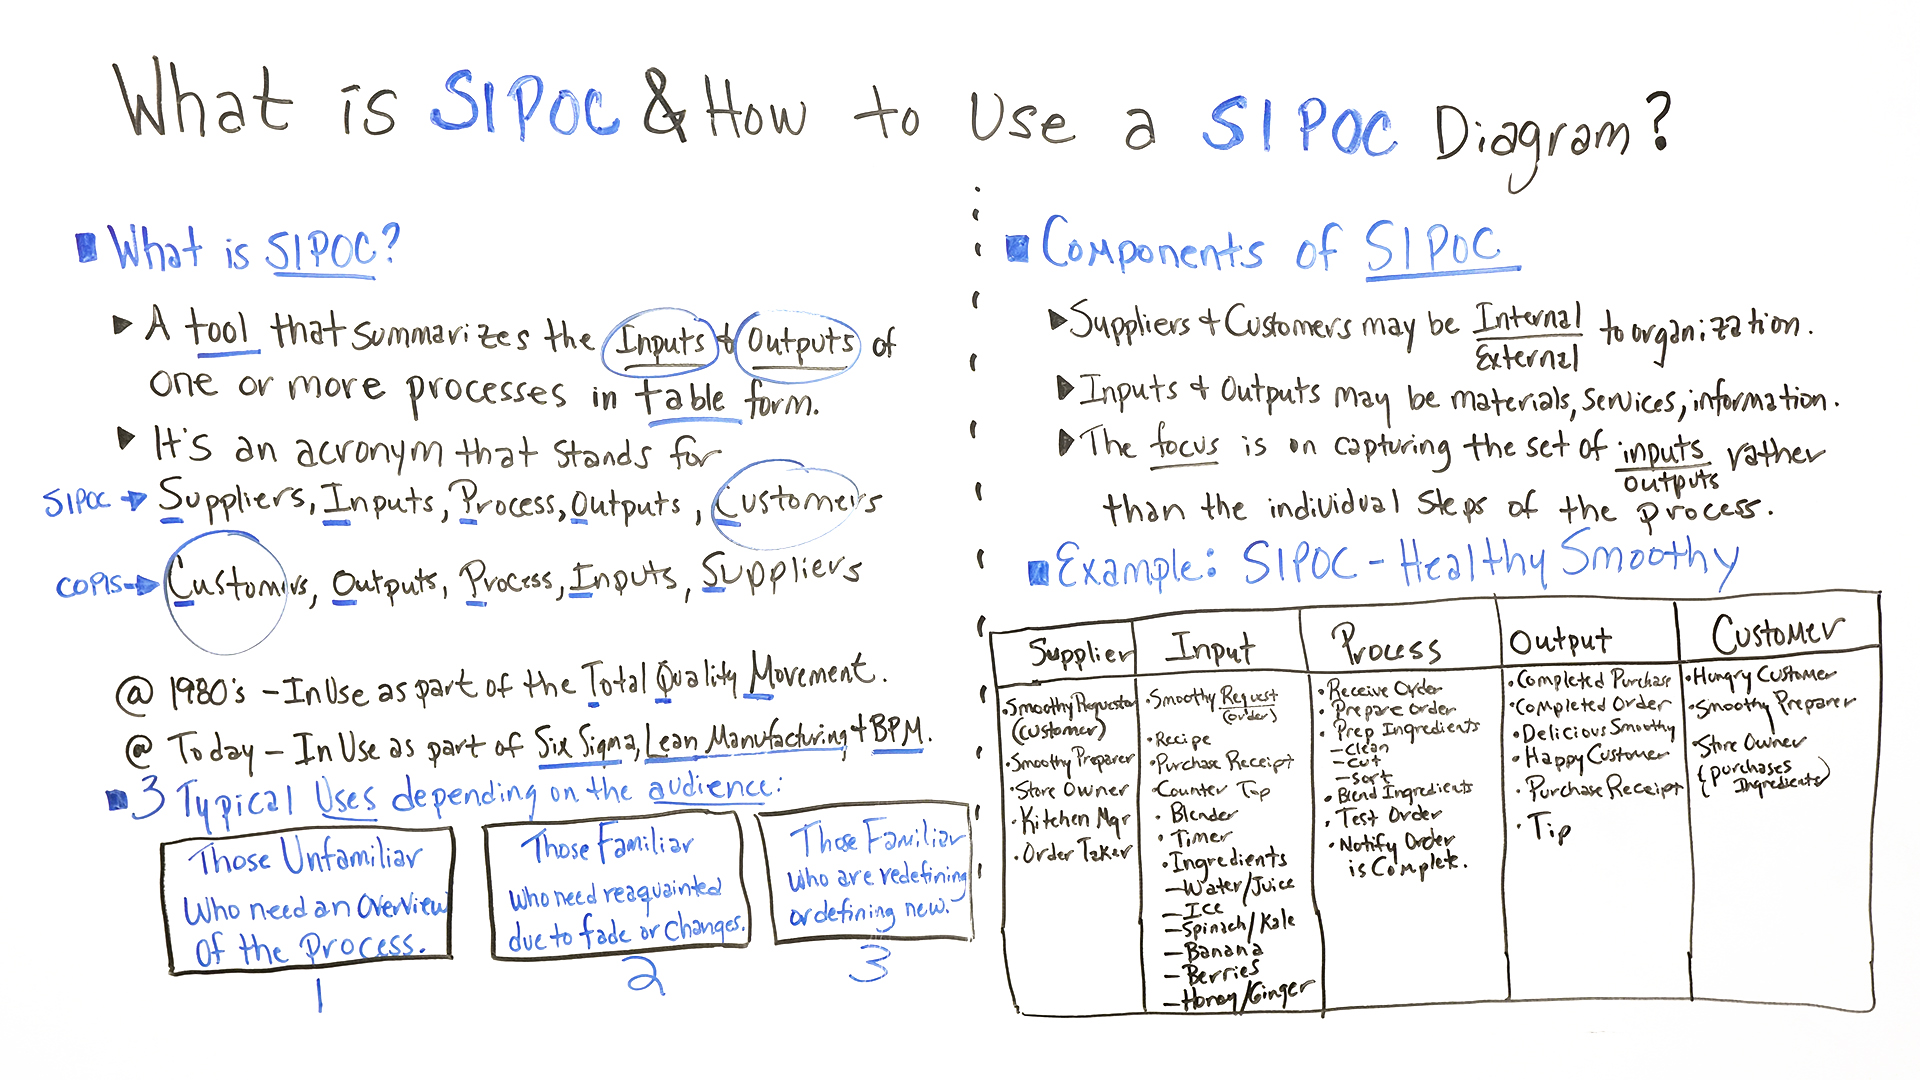 learn about SIPOC and SIPOC diagrams